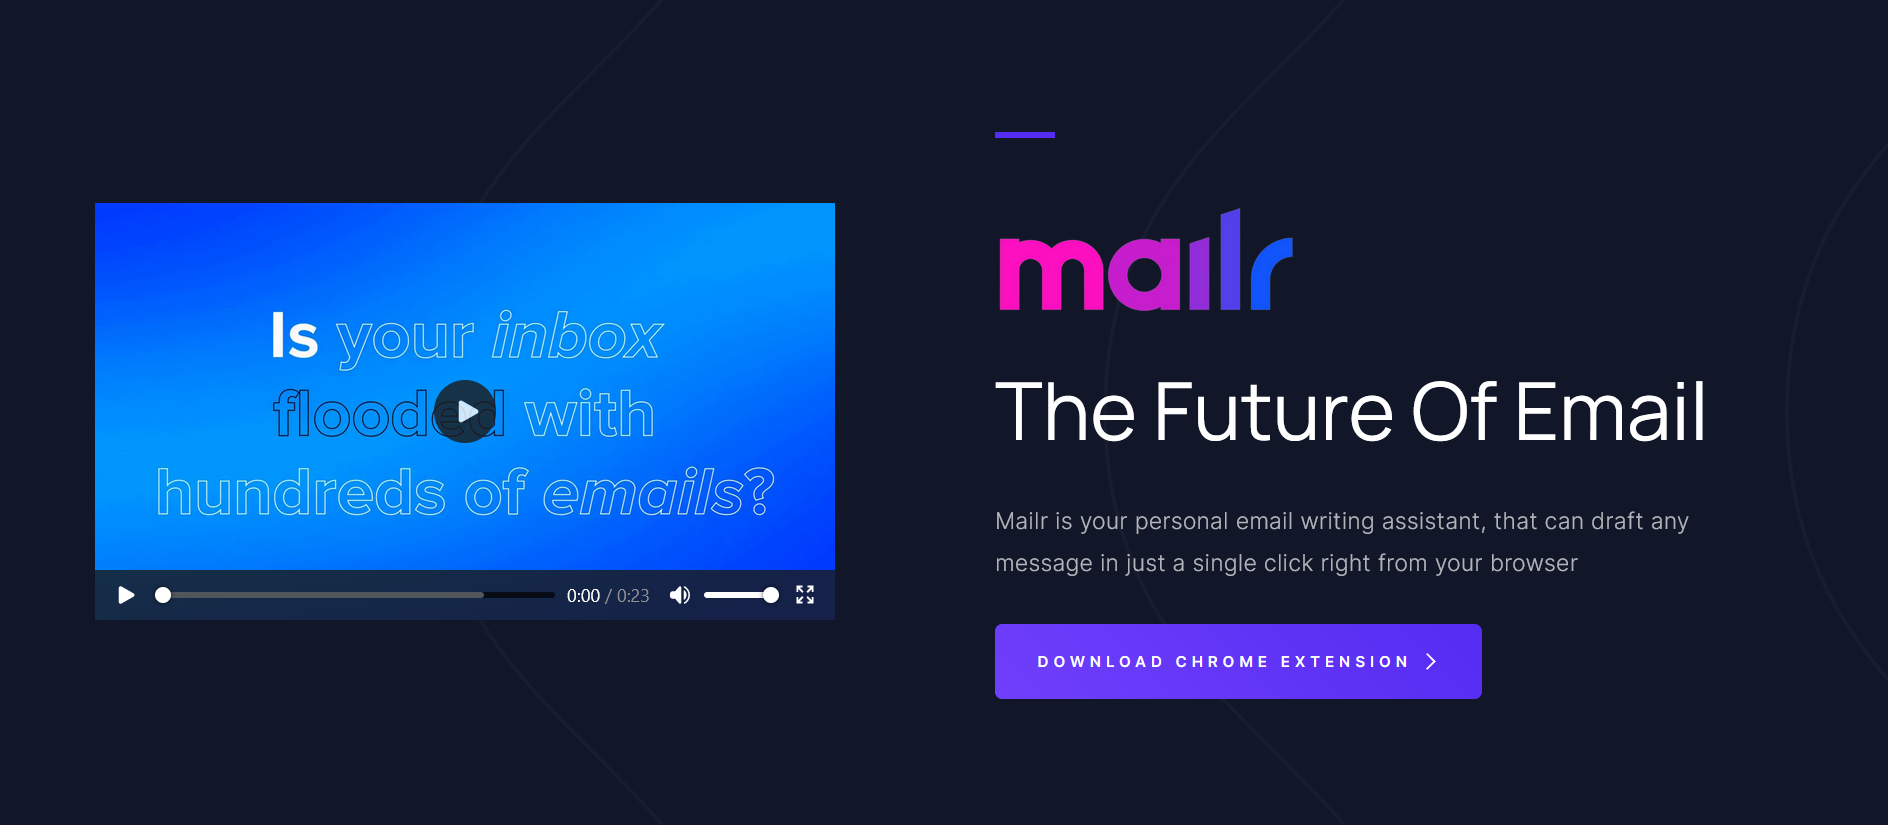 MailrAn AI email assistant that can compose and respond to